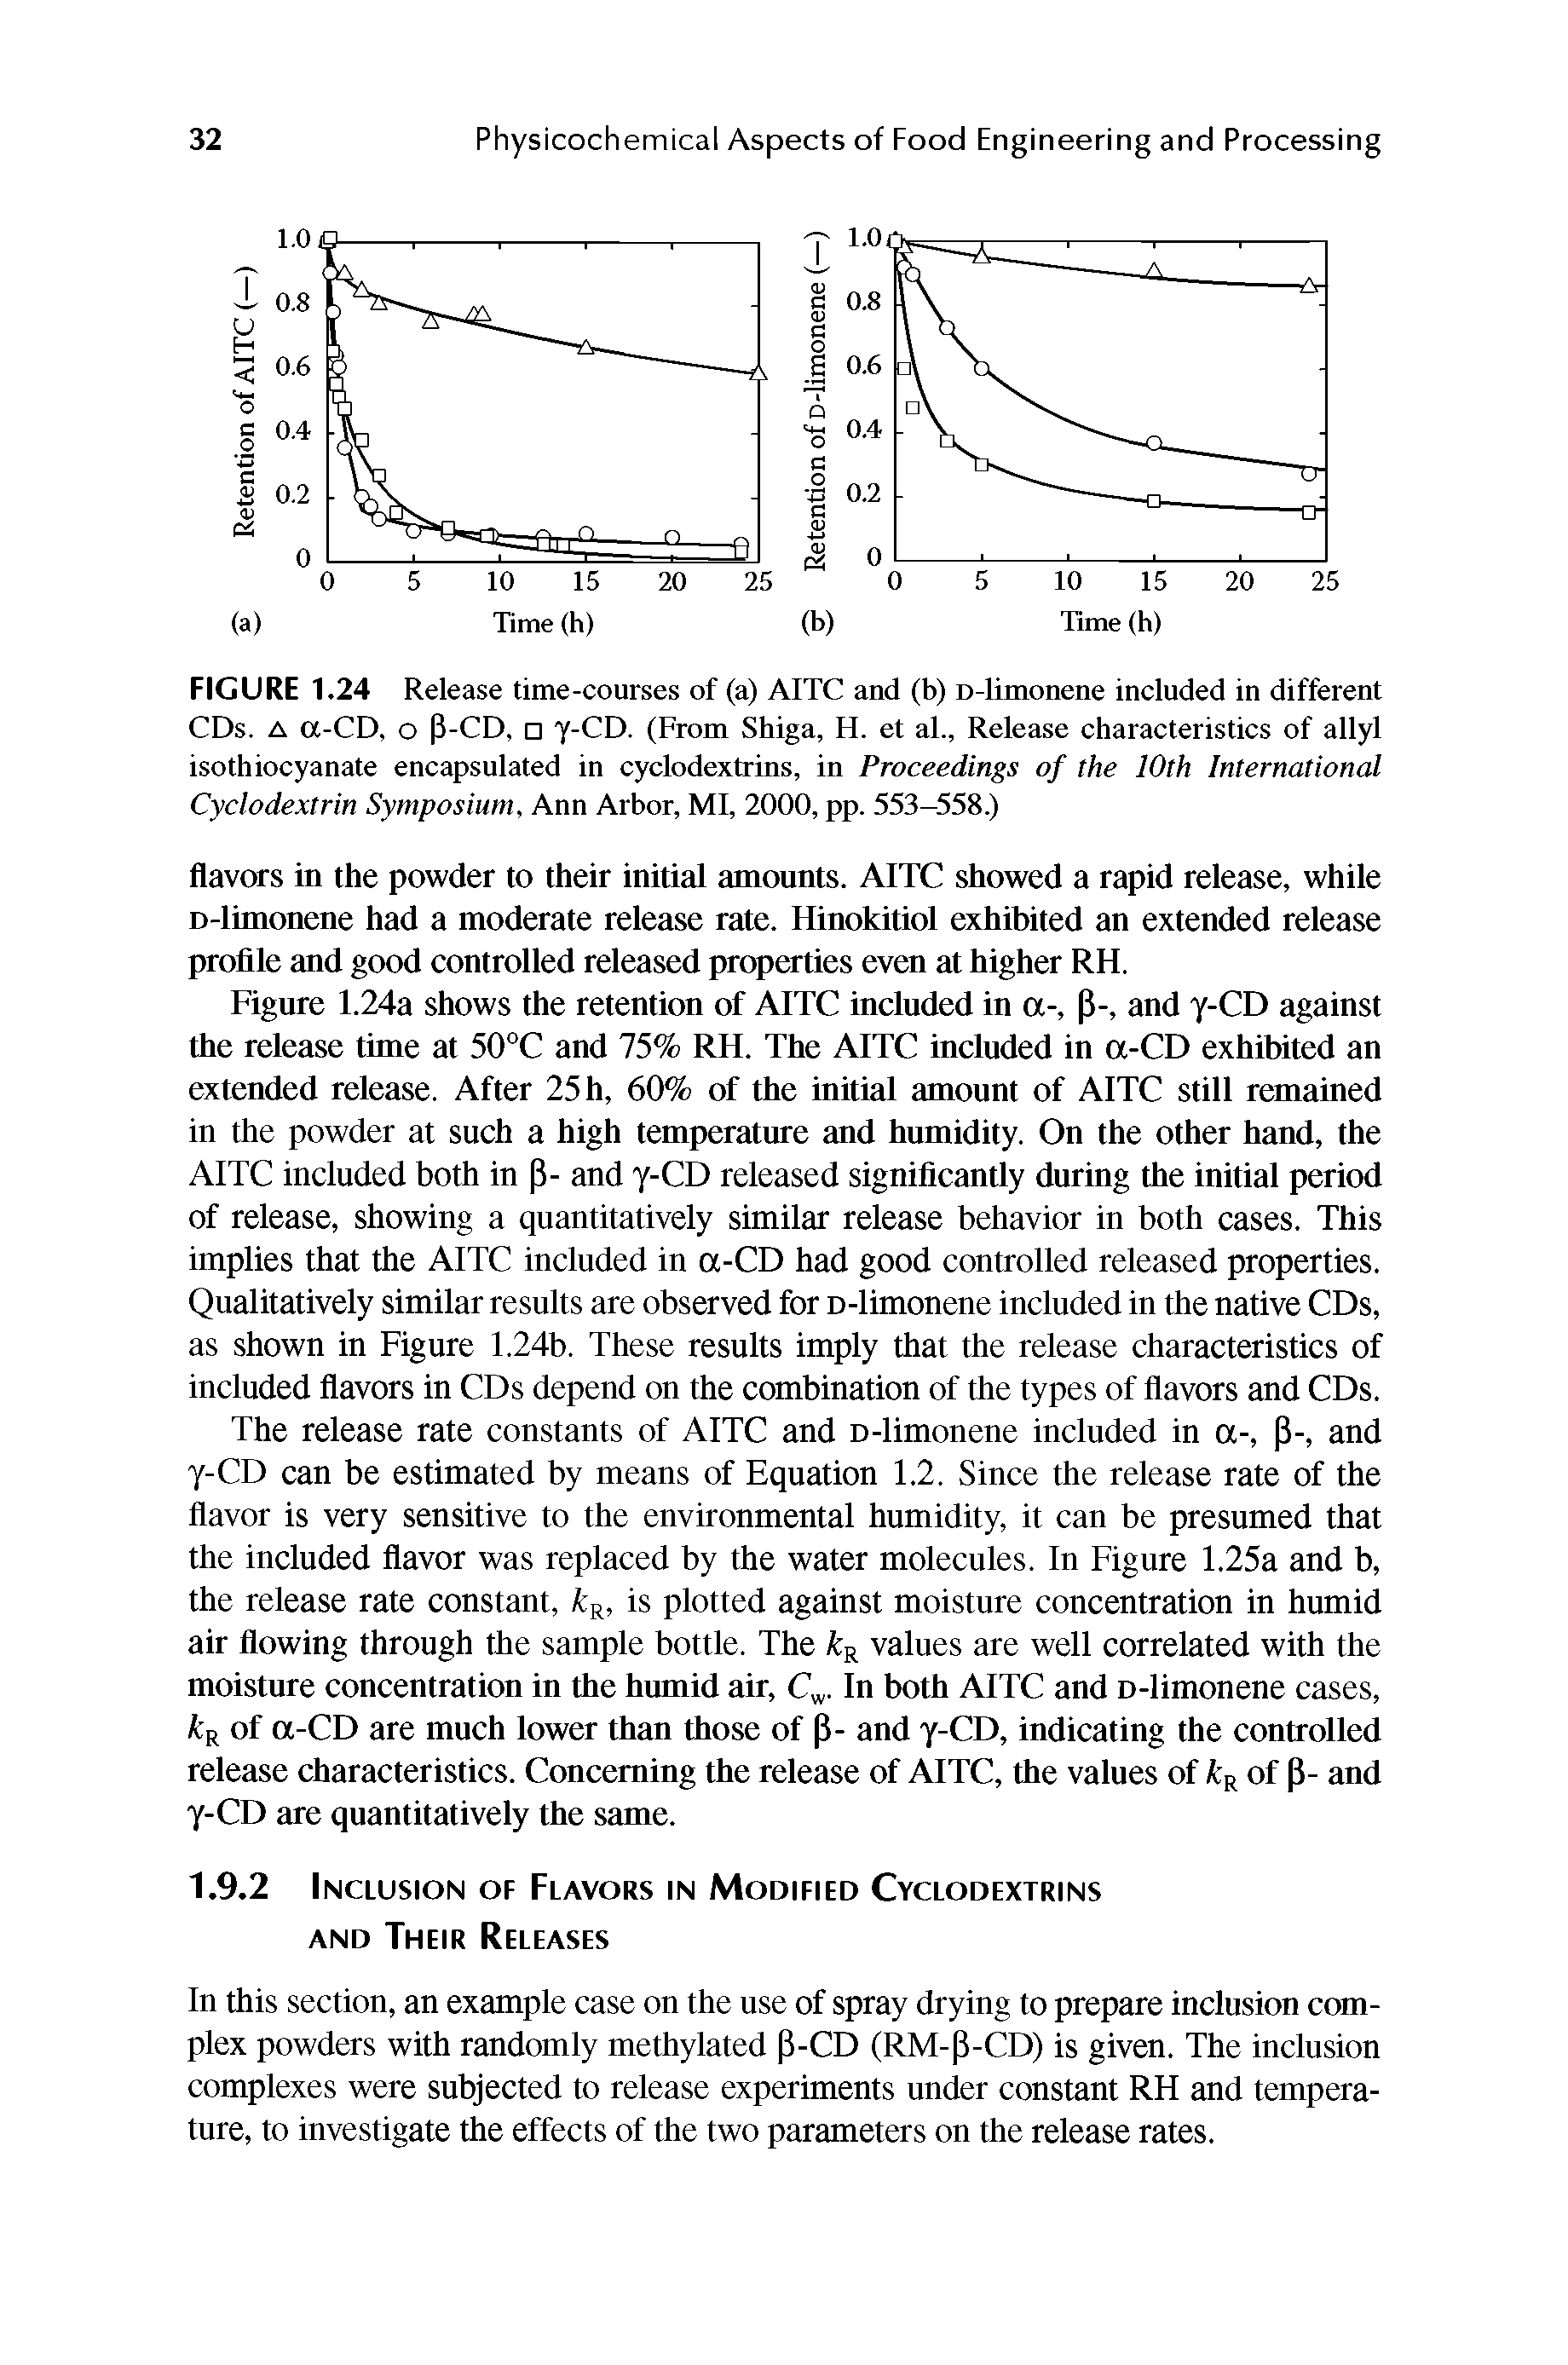 Figure 1.24a shows the retention of AITC included in a-, p-, and y-CD against the release time at 50°C and 15% RH. The AITC included in a-CD exhibited an extended release. After 25 h, 60% of the initial amount of AITC still remained in the powder at such a high temperature and humidity. On the other hand, the AITC included both in P- and y-CD released significantly during the initial period of release, showing a quantitatively similar release behavior in both cases. This implies that the AITC included in a-CD had good controlled released properties. Qualitatively similar results are observed for D-limonene included in the native CDs, as shown in Figure 1.24b. These results imply that the release characteristics of included flavors in CDs depend on the combination of the types of flavors and CDs.